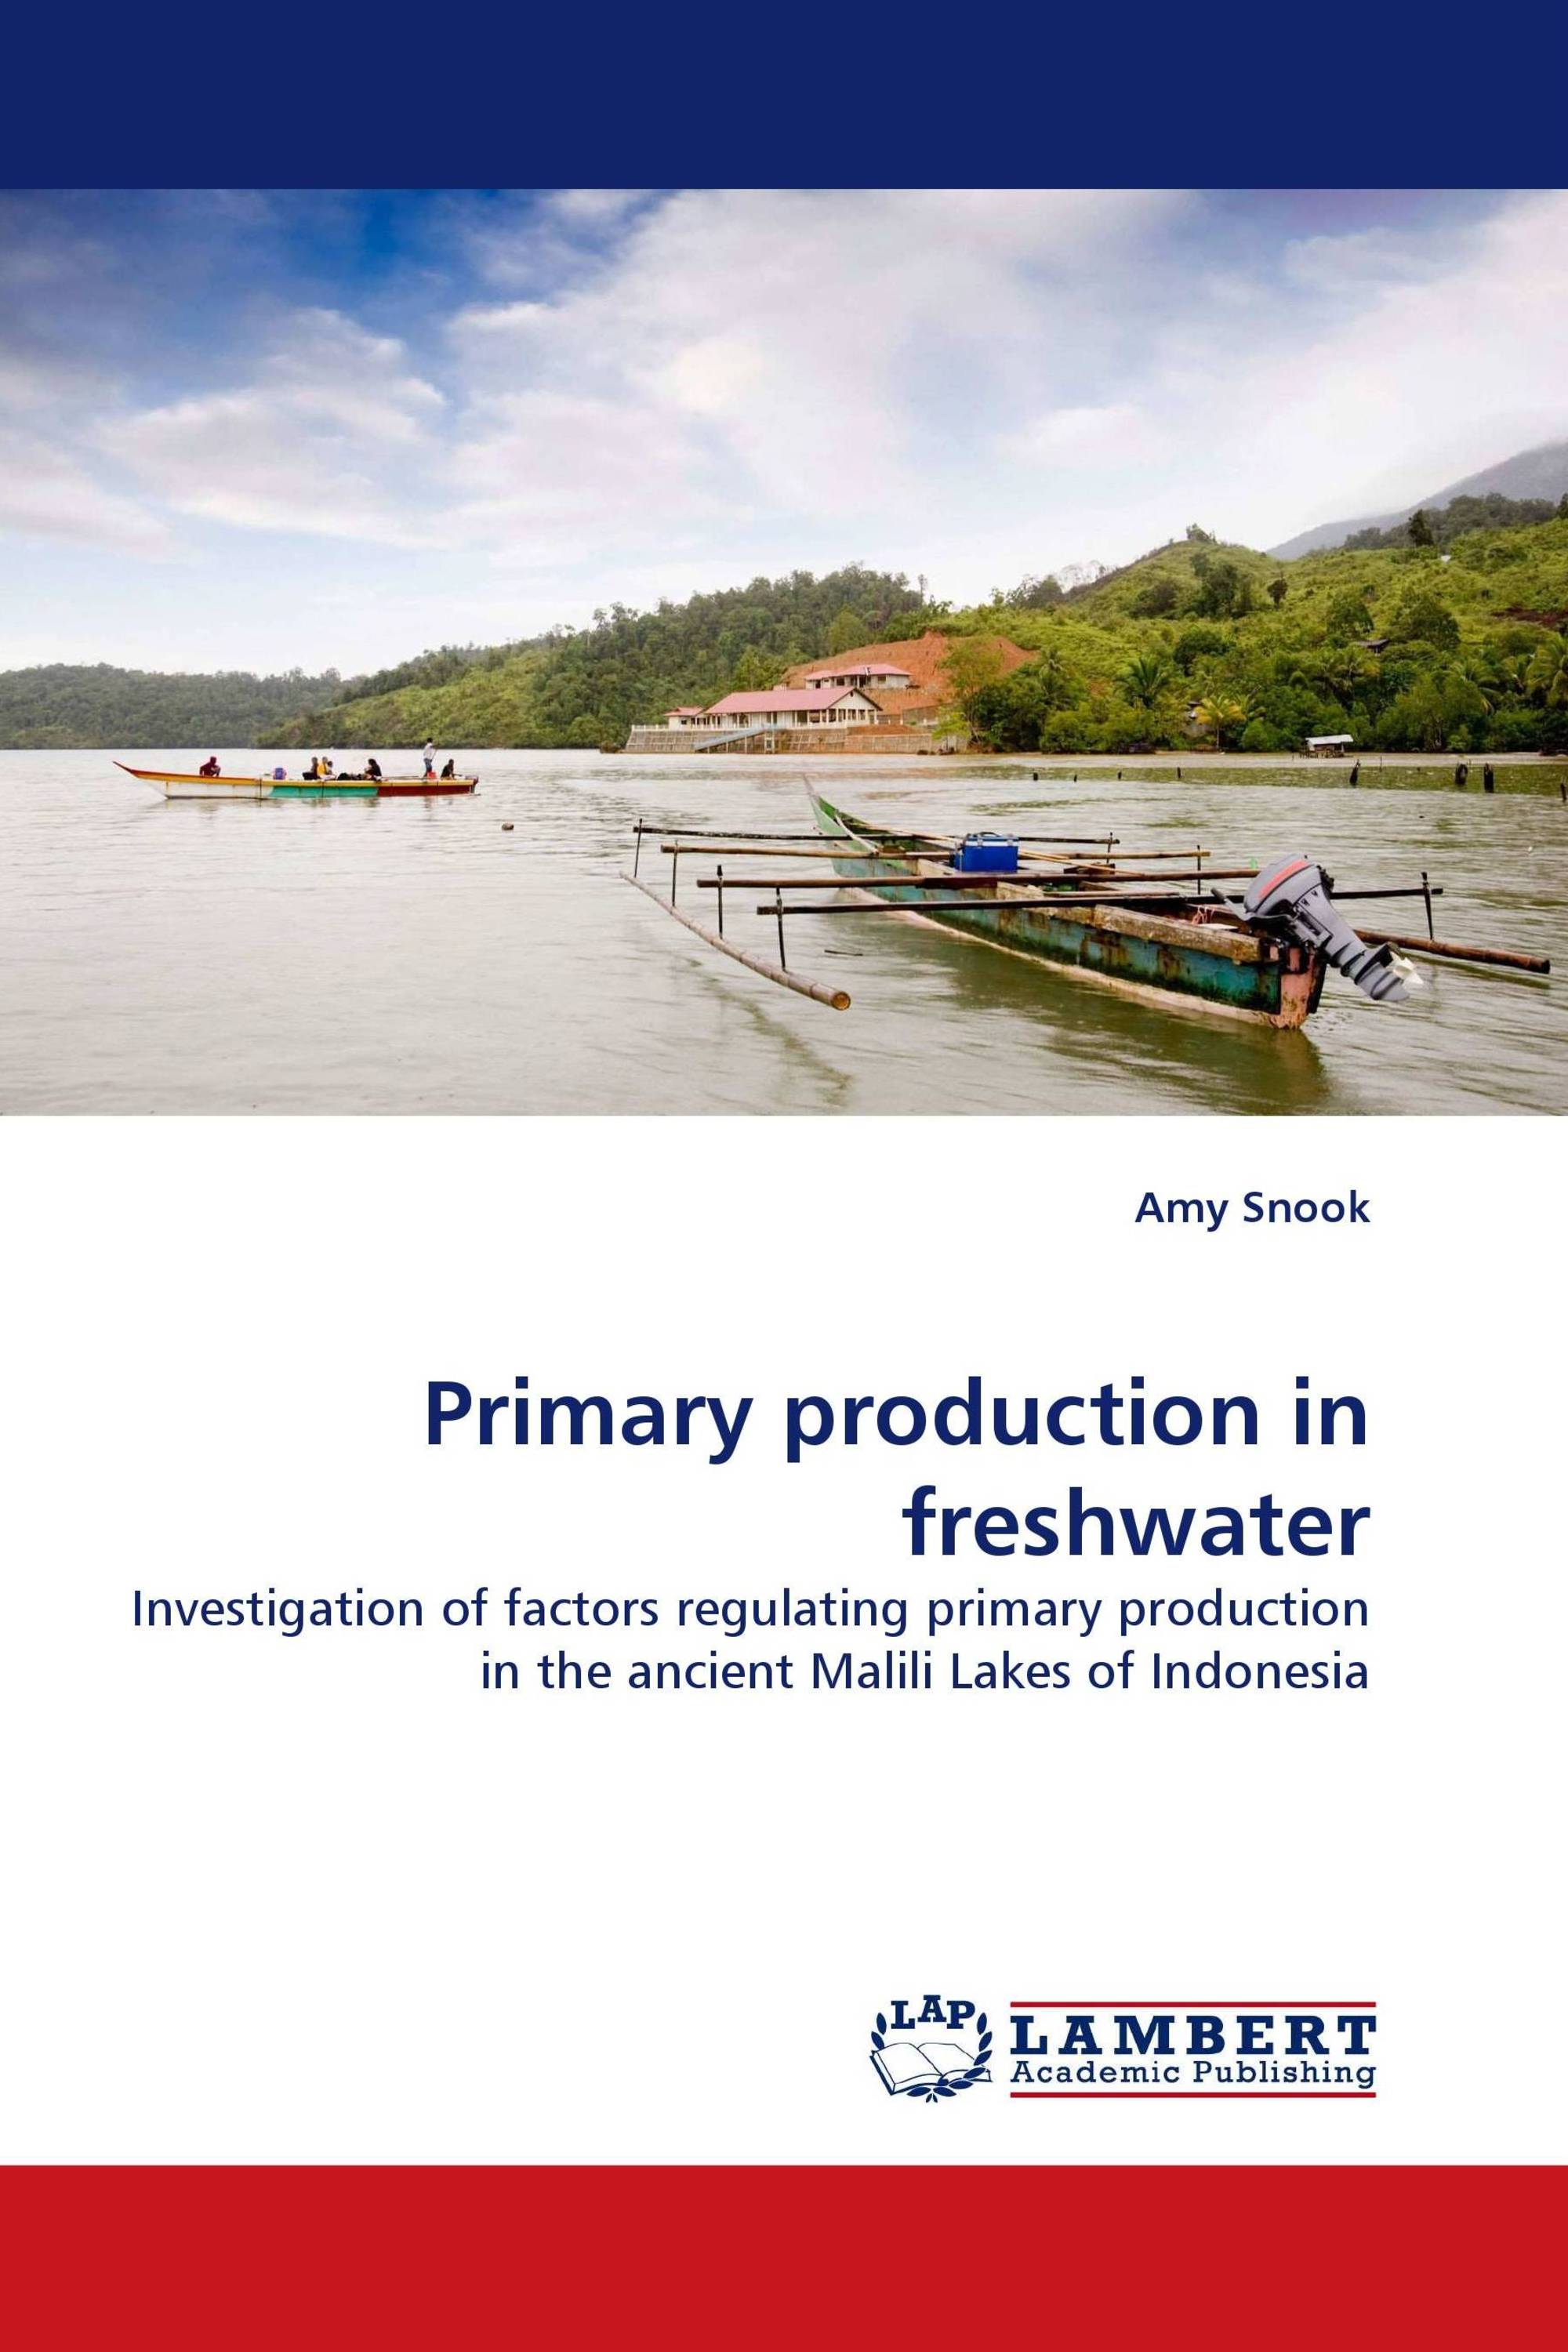 Primary production in freshwater